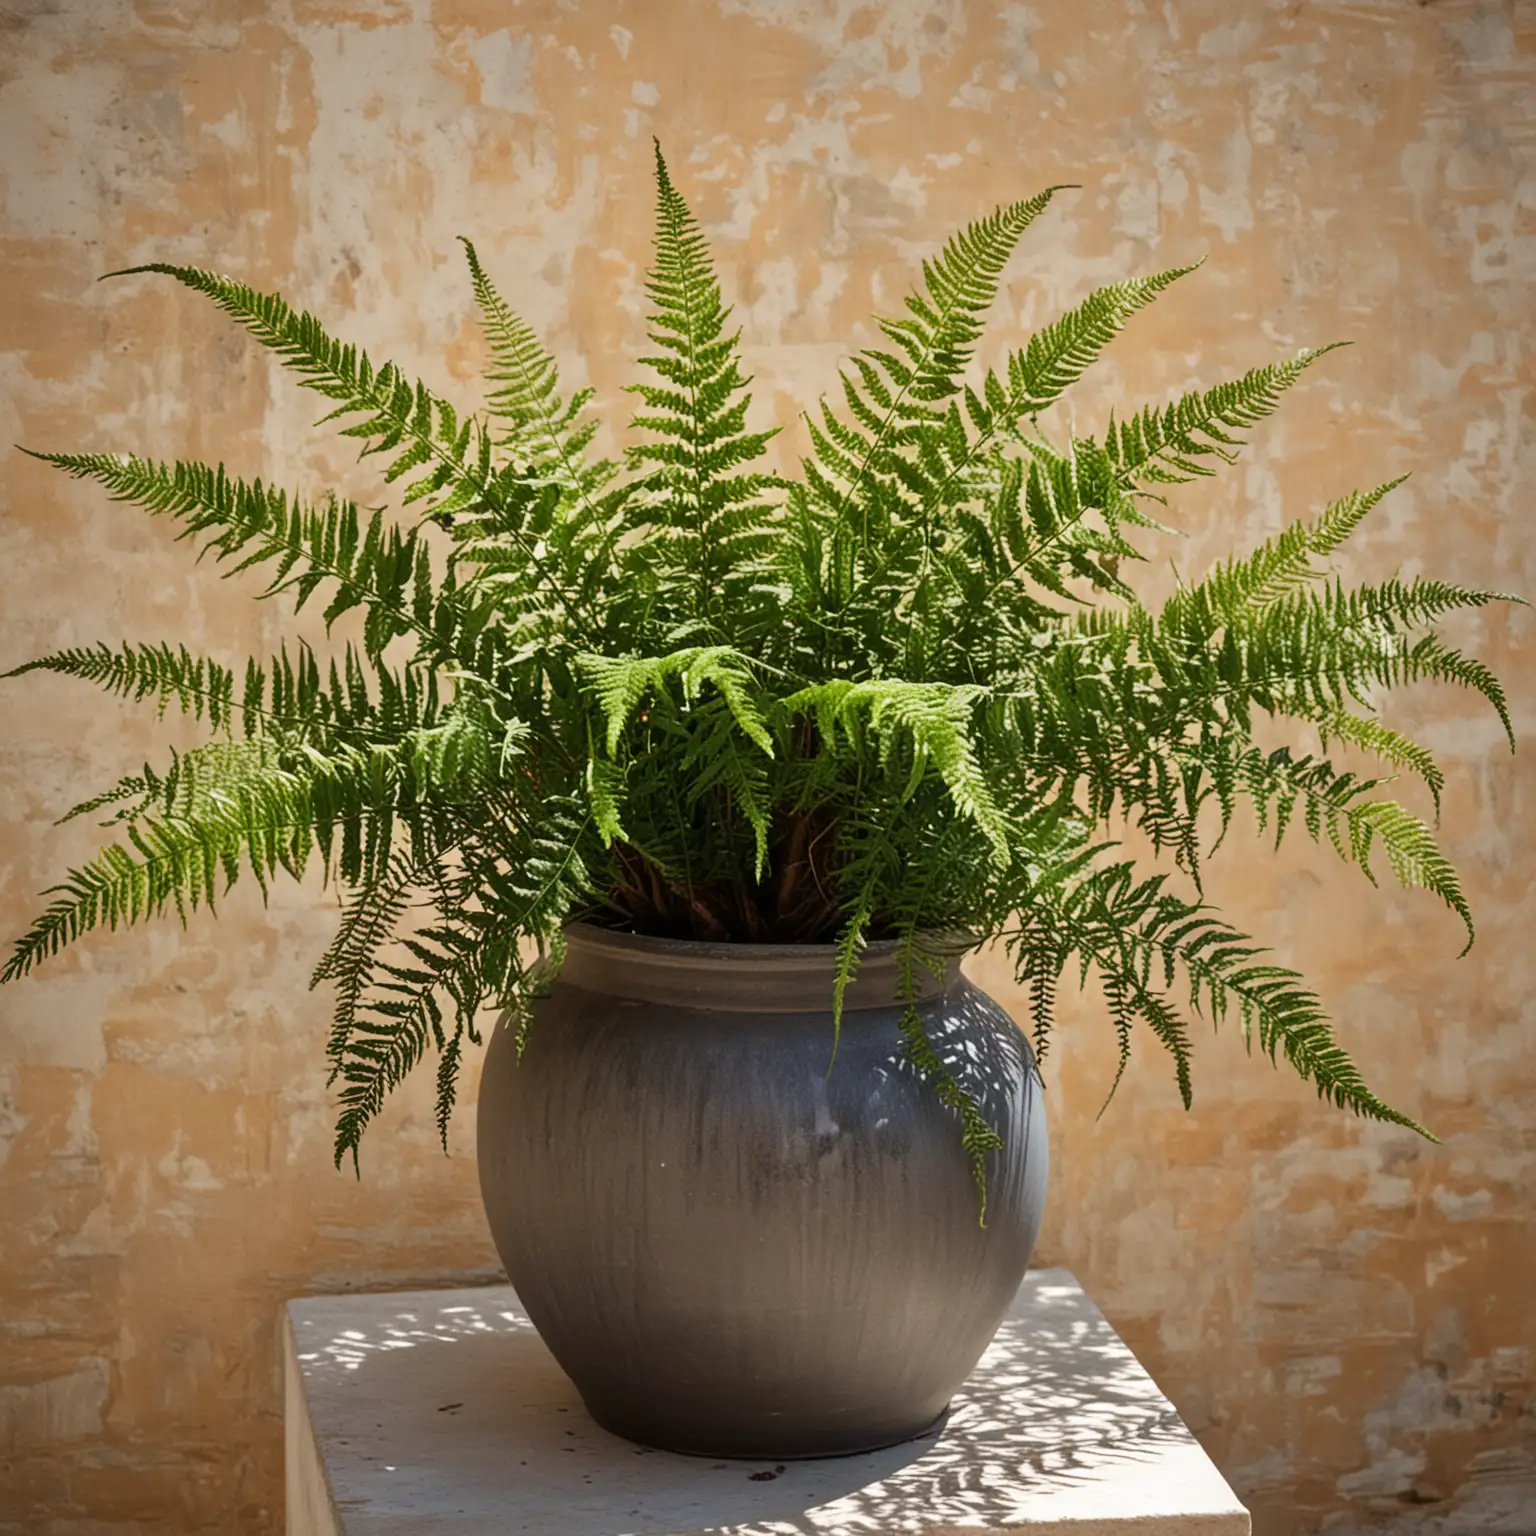 a luxury Villa in the Meditteranean Sea showing a close up of a small fern in a full view luxury pot